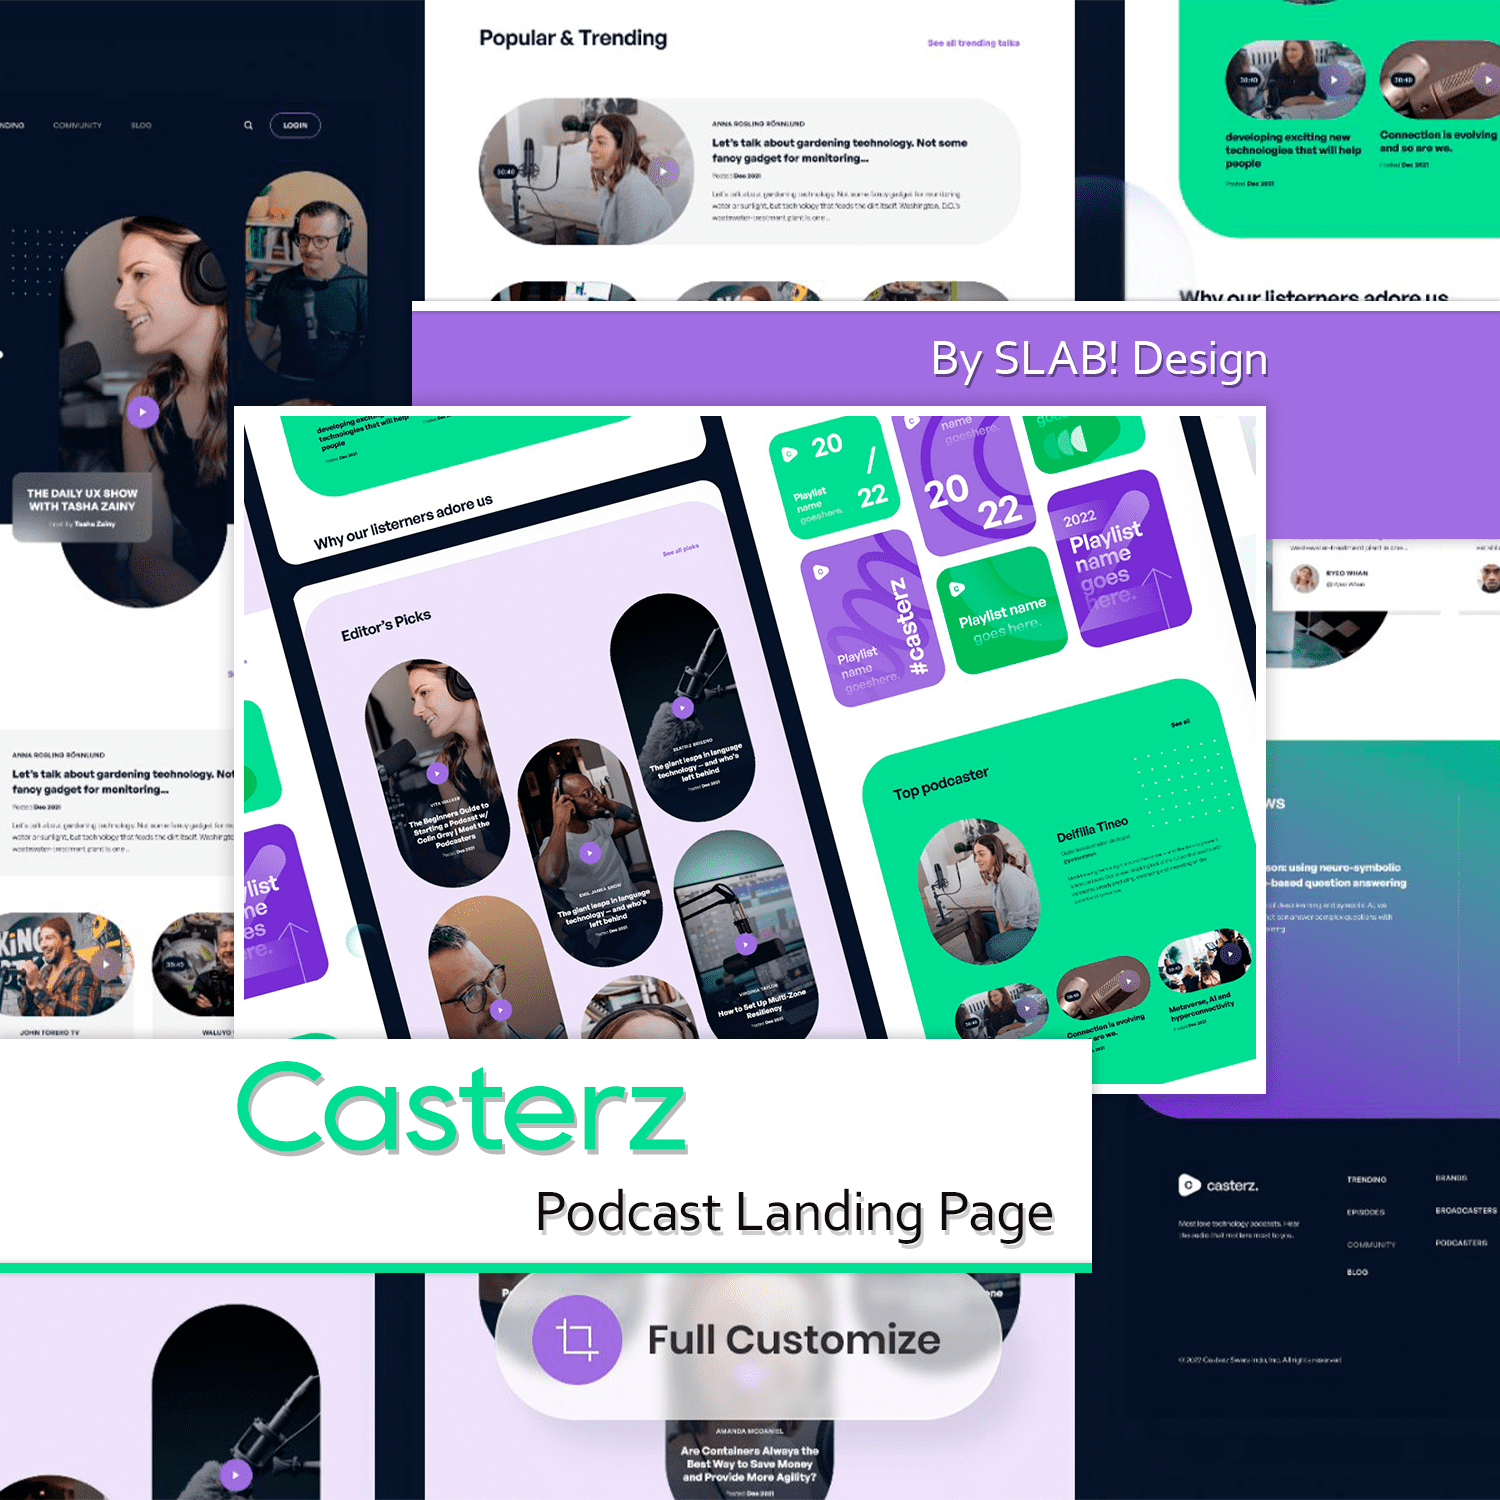 Casterz - Podcast Landing Page cover.